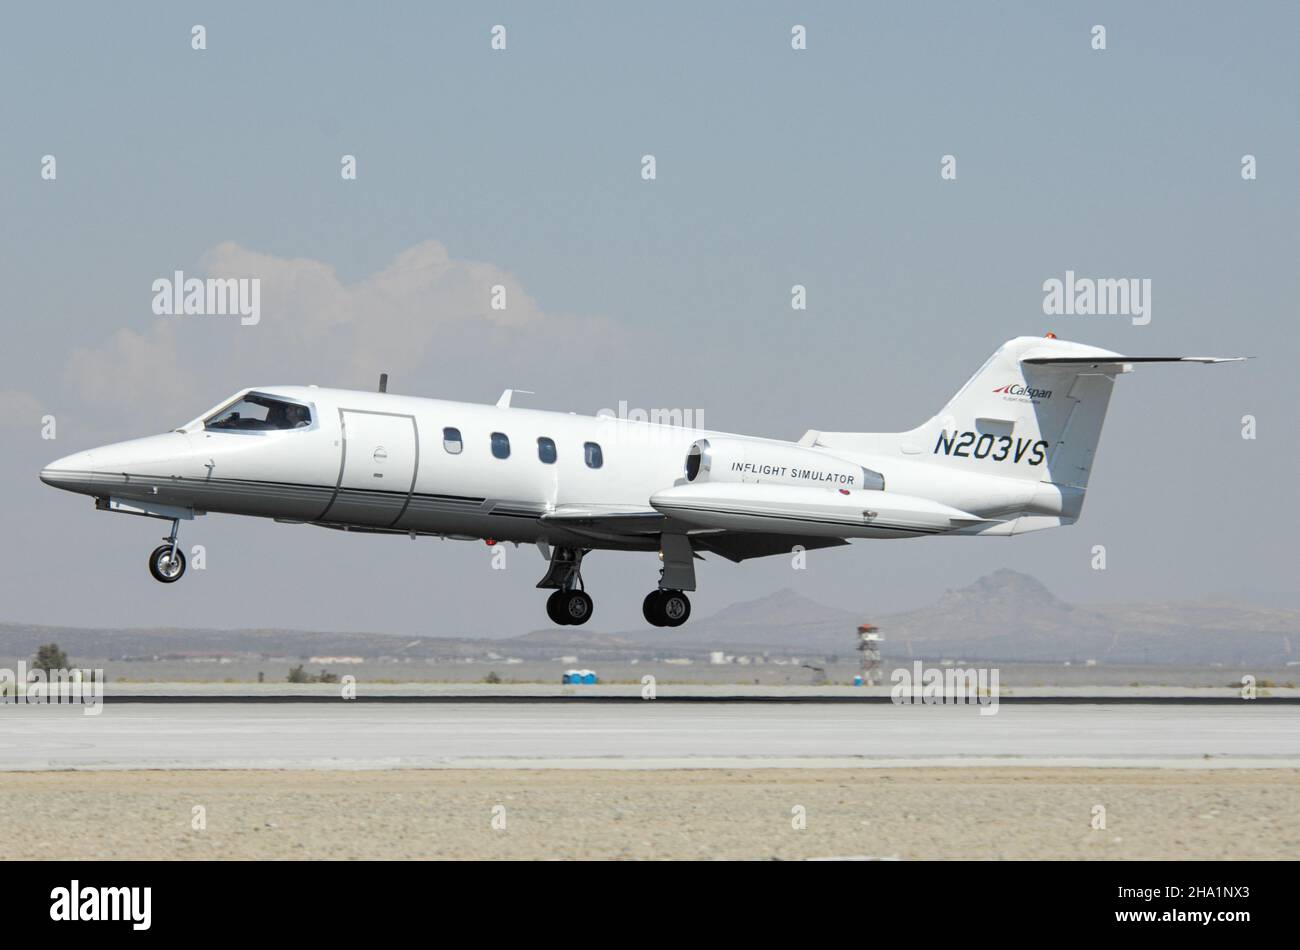 CALSPAN Learjet landing at Edwards Air Force Base in California Stock Photo